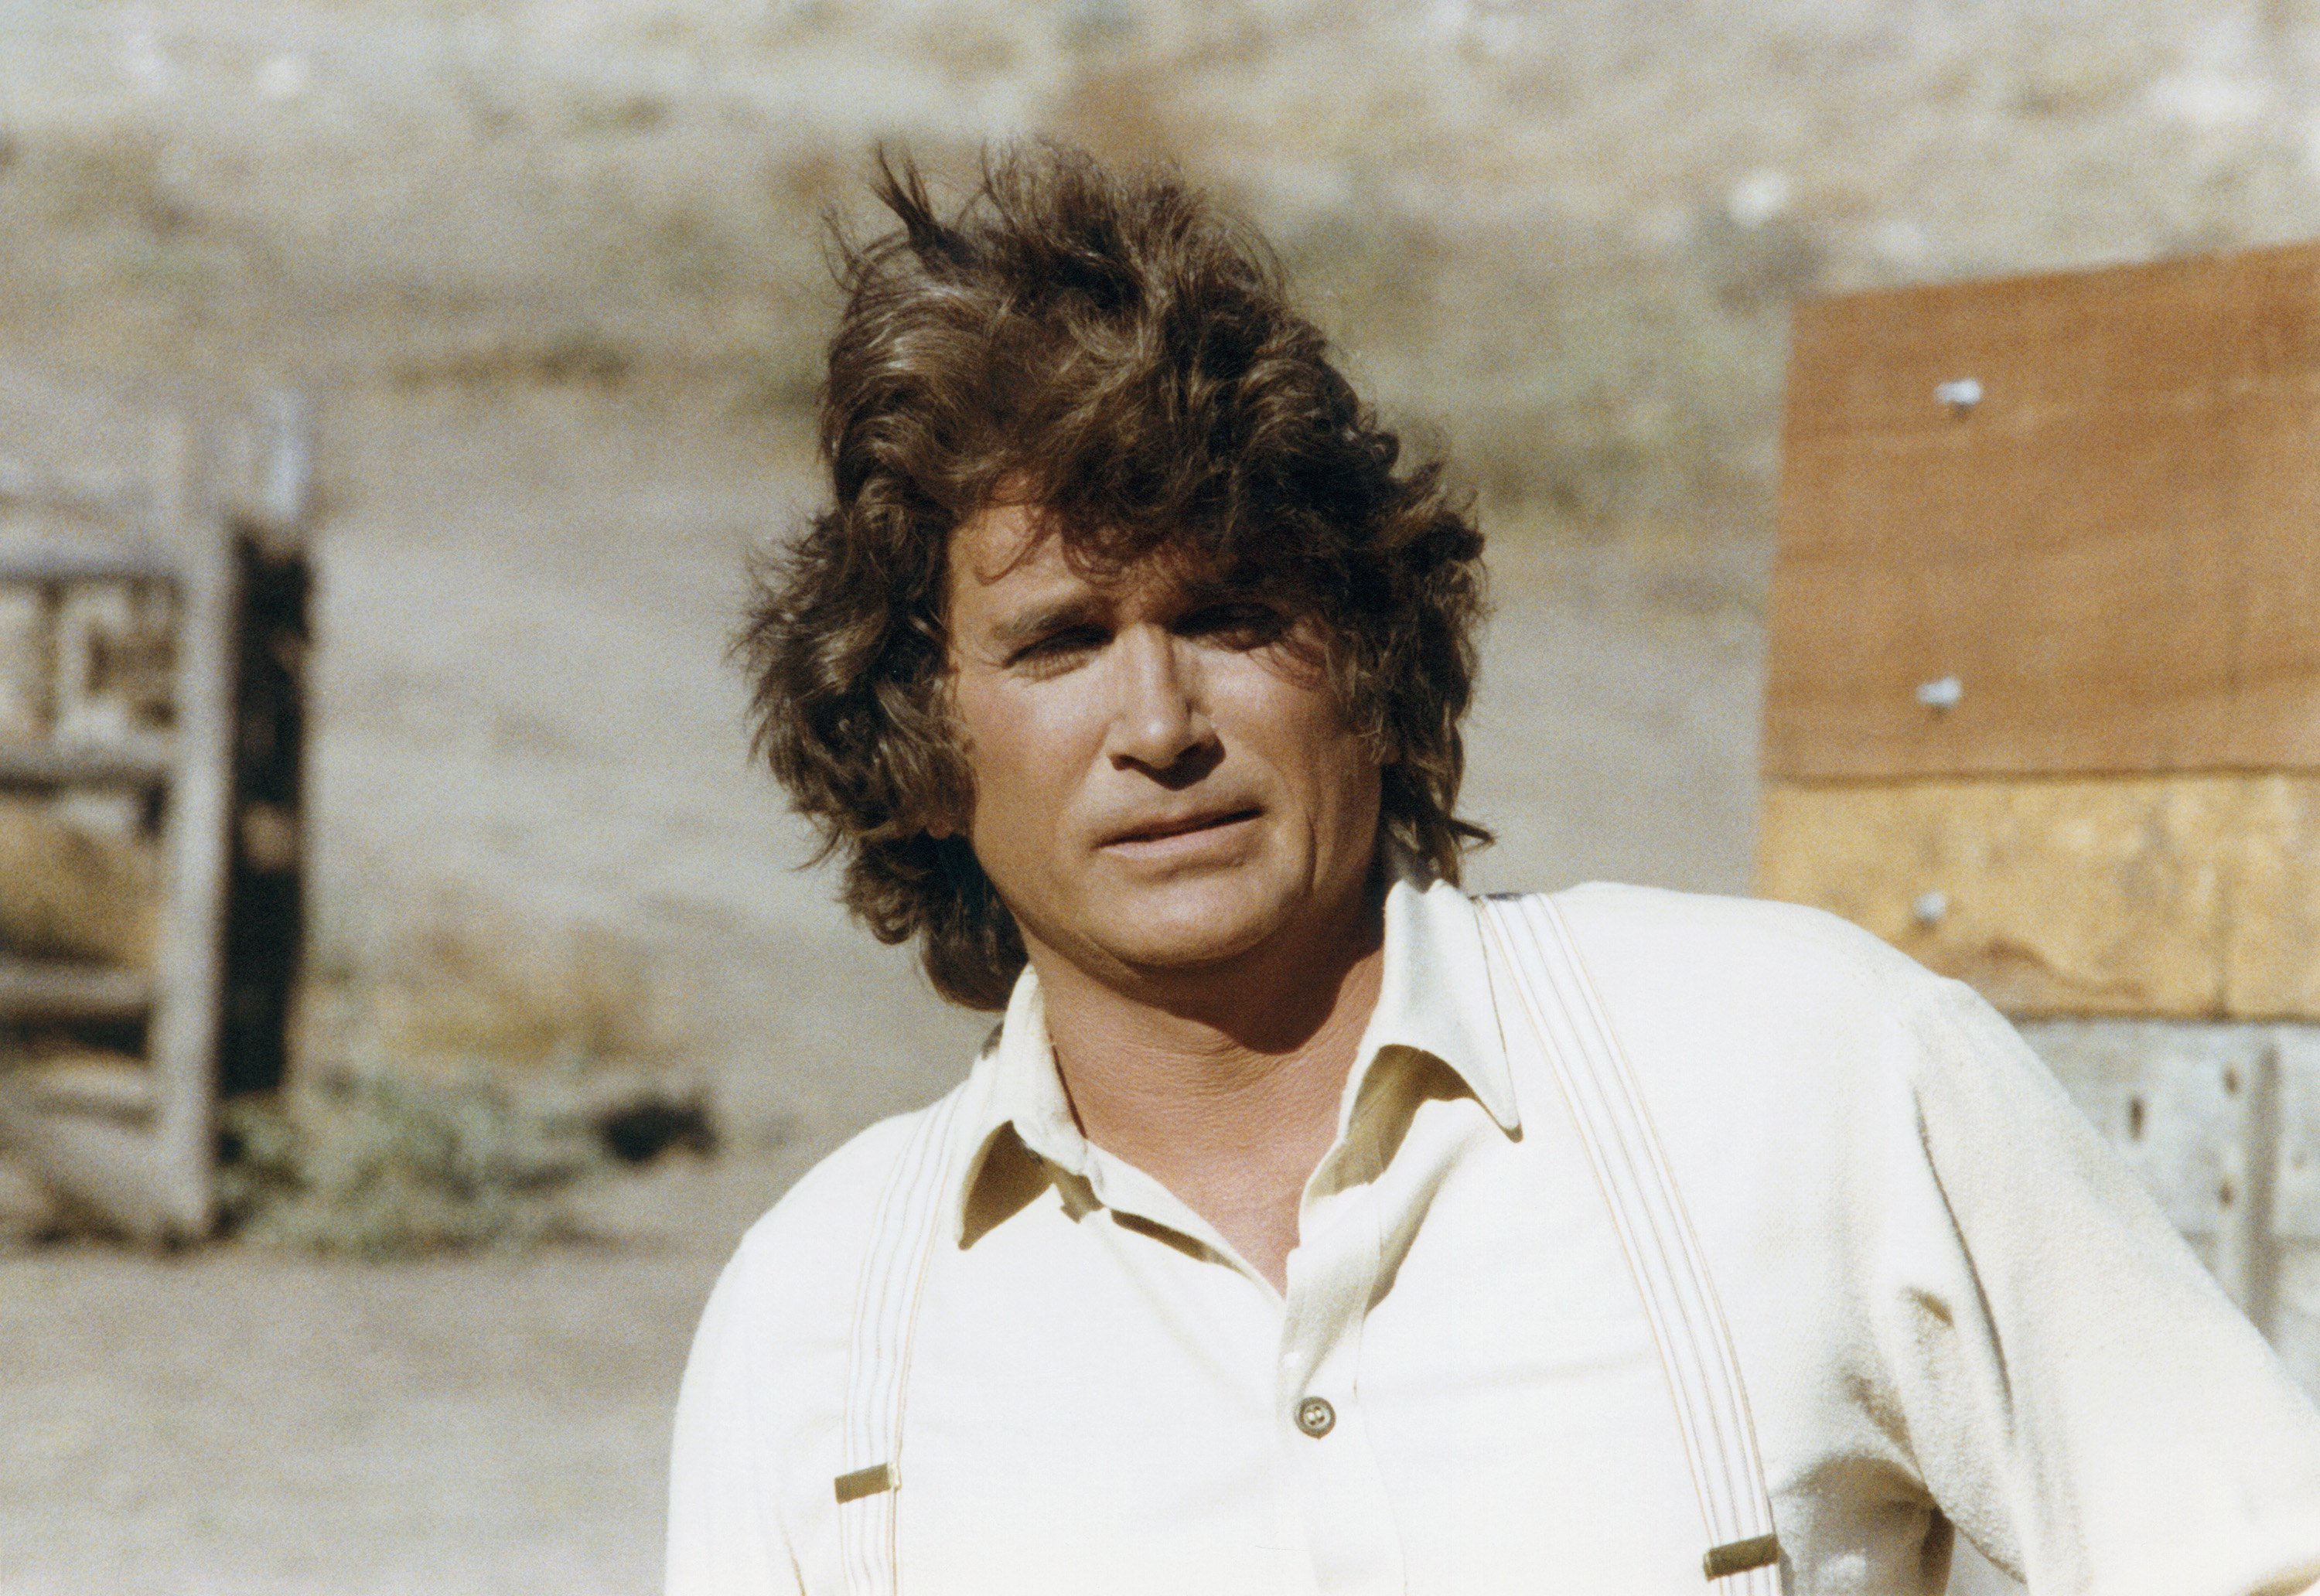 Michael Landon as Charles Ingalls on 'Little House on the Prairie'